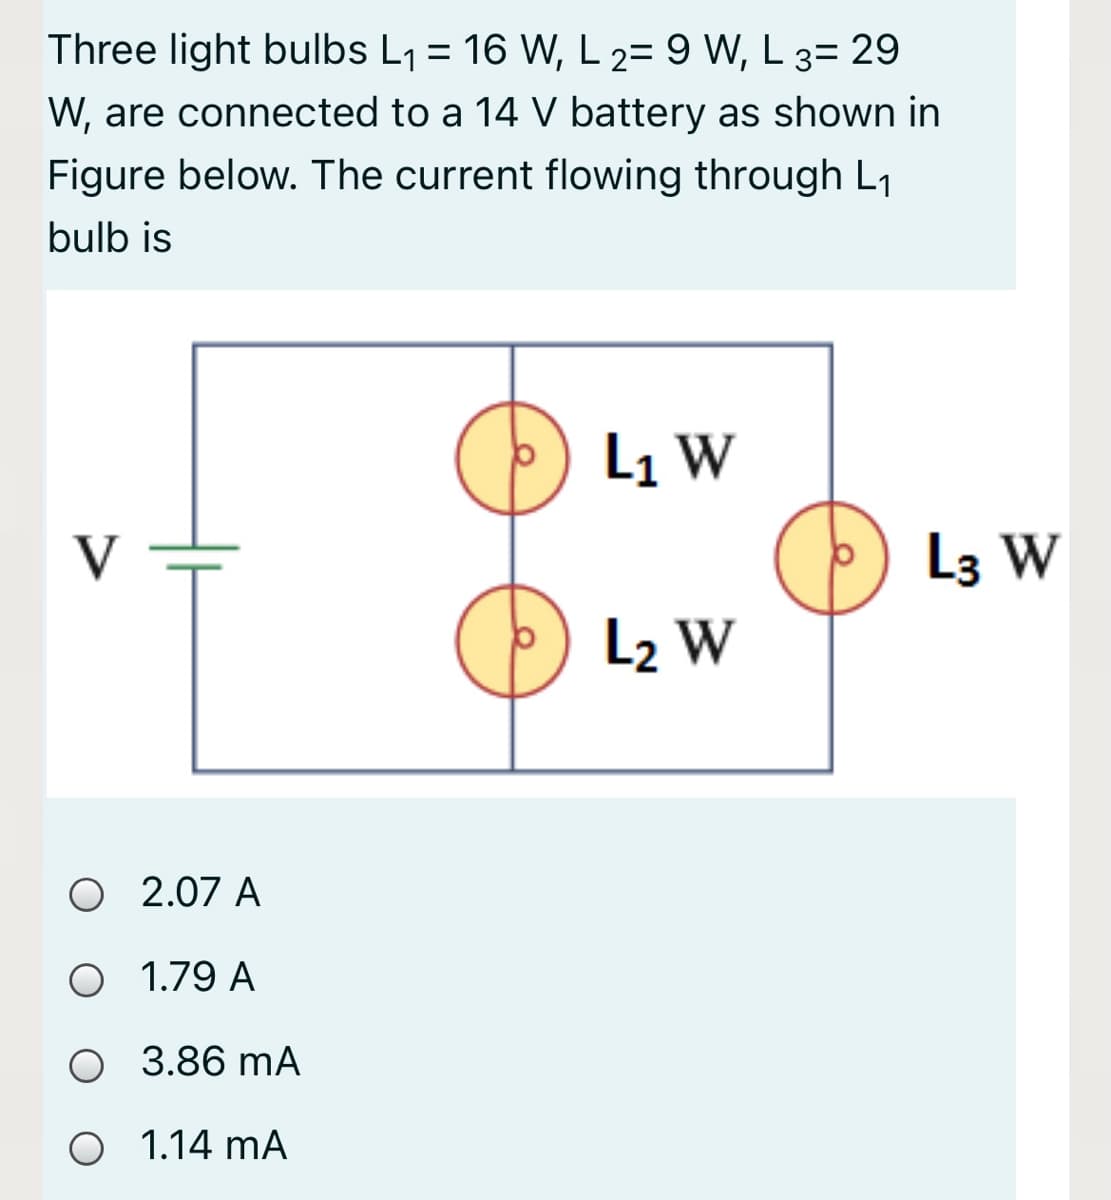 Three light bulbs L1 = 16 W, L 2= 9 W, L 3= 29
W, are connected to a 14 V battery as shown in
Figure below. The current flowing through L1
bulb is
L1 W
L3 W
L2 W
O 2.07 A
O 1.79 A
O 3.86 mA
O 1.14 mA
